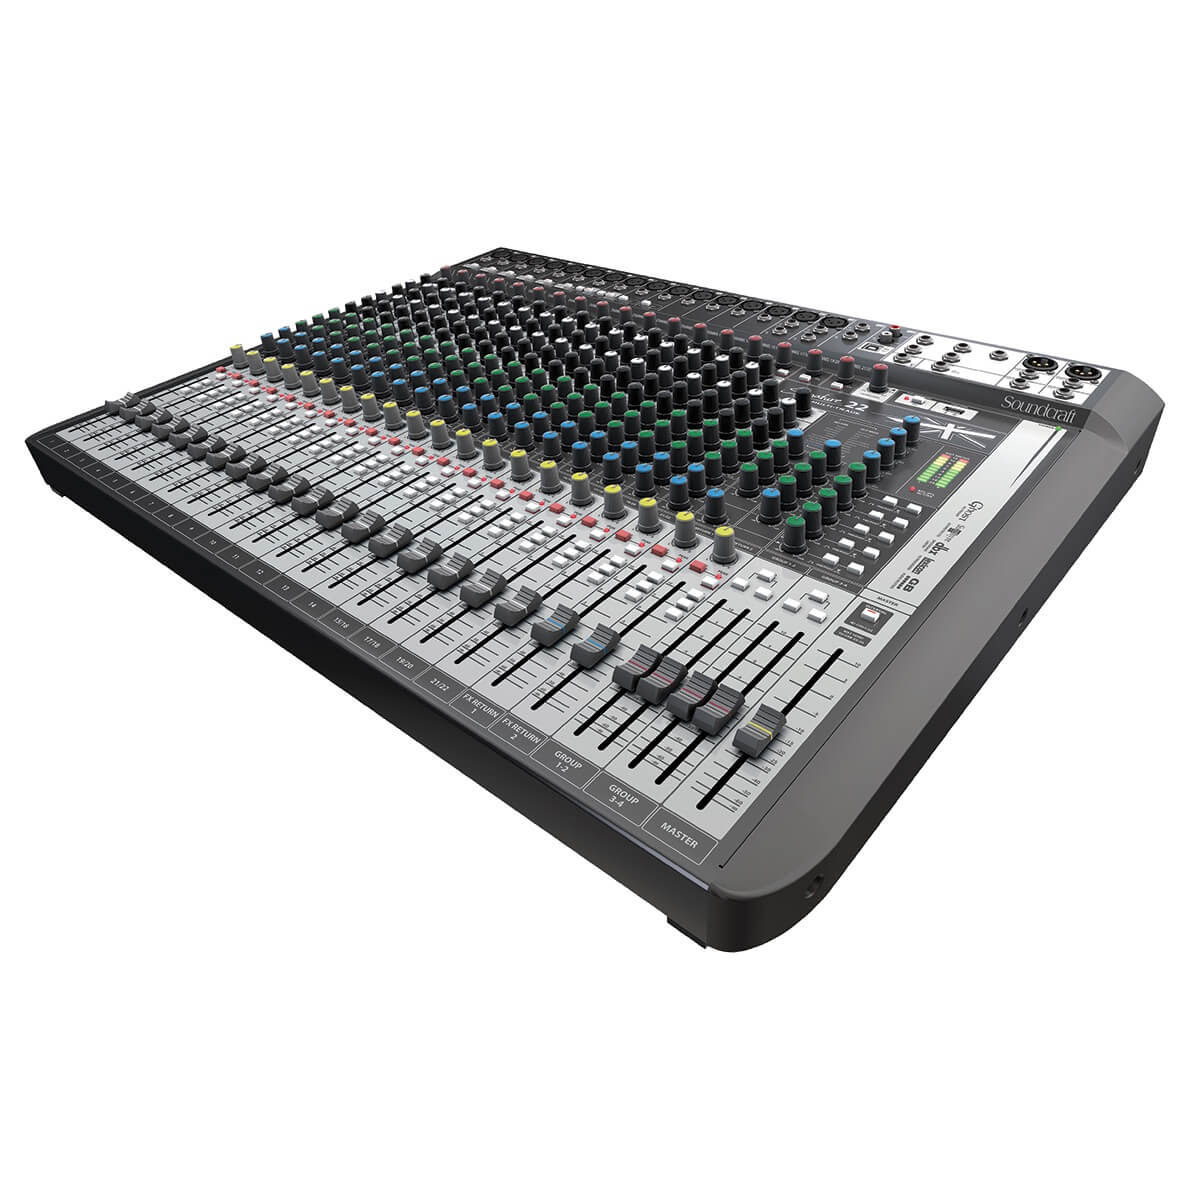 Soundcraft Signature 22MTK - 22-channel Analog Mixer with Lexicon Effects, right